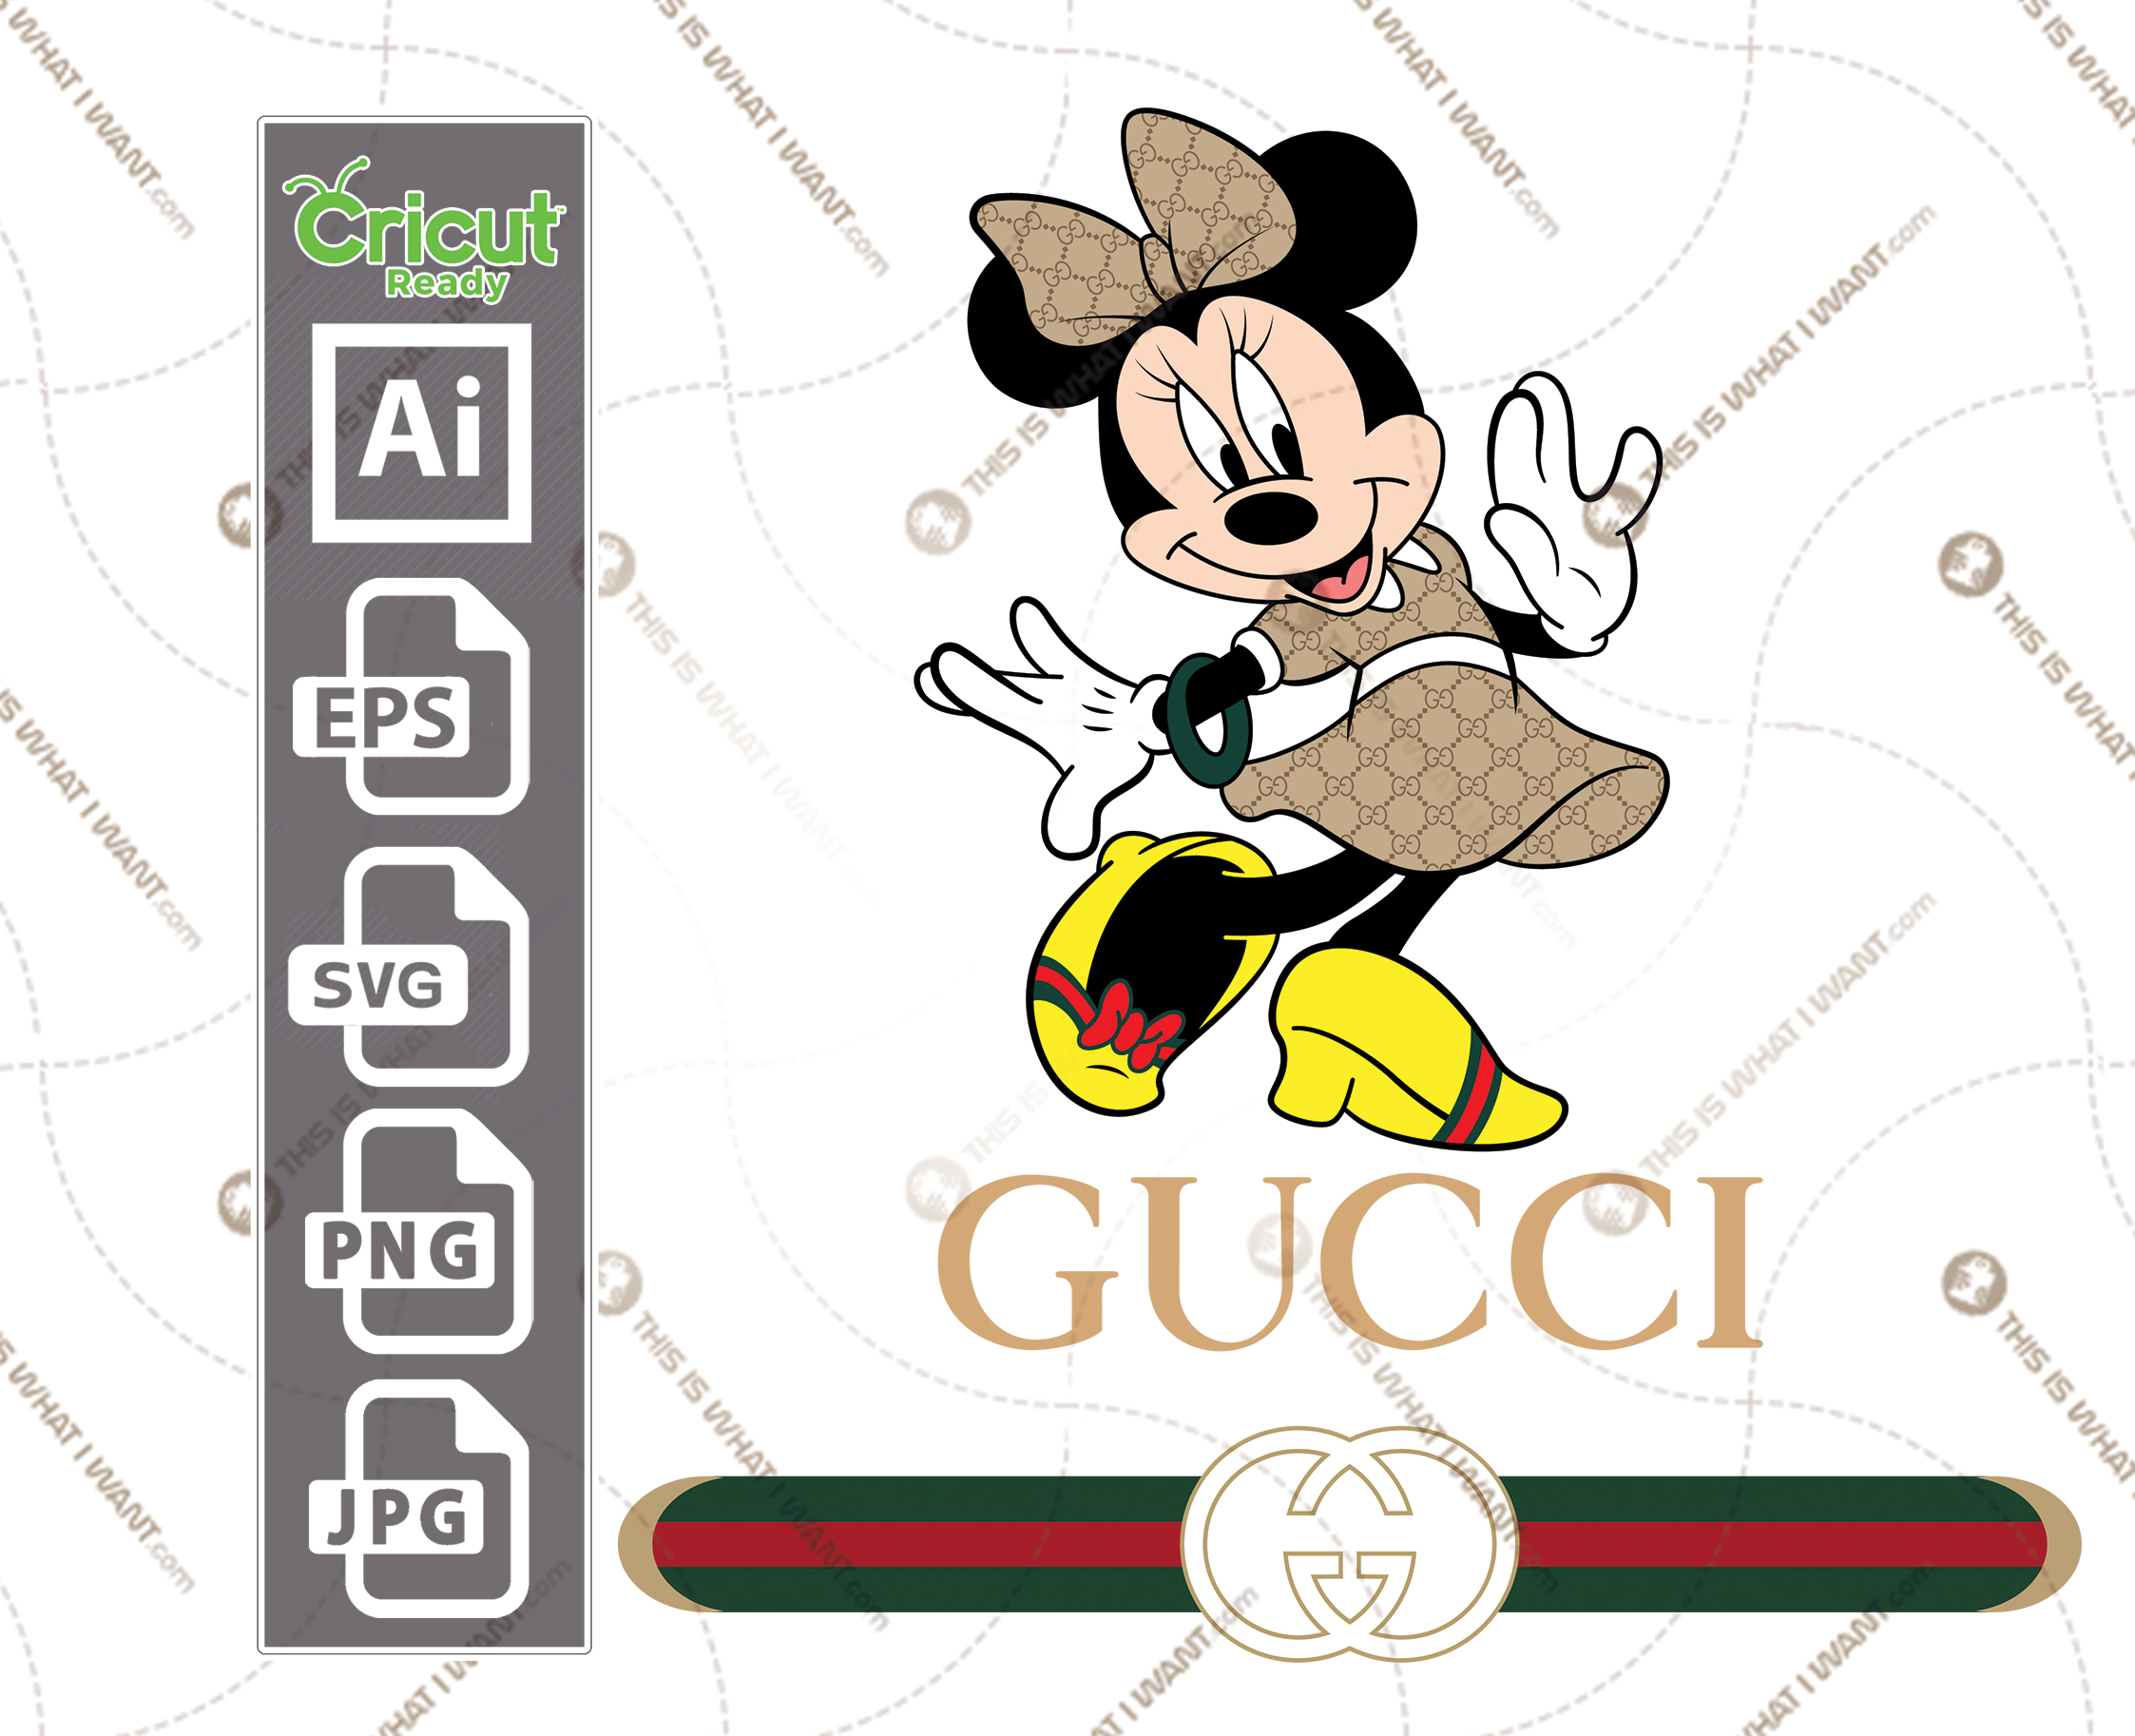 Download Gucci Minnie Mouse Inspired Vector Art Design Hi Quality Digital Downloadable Files Bundle Ai Svg Jpg Png Eps Cricut Ready This Is What I Want